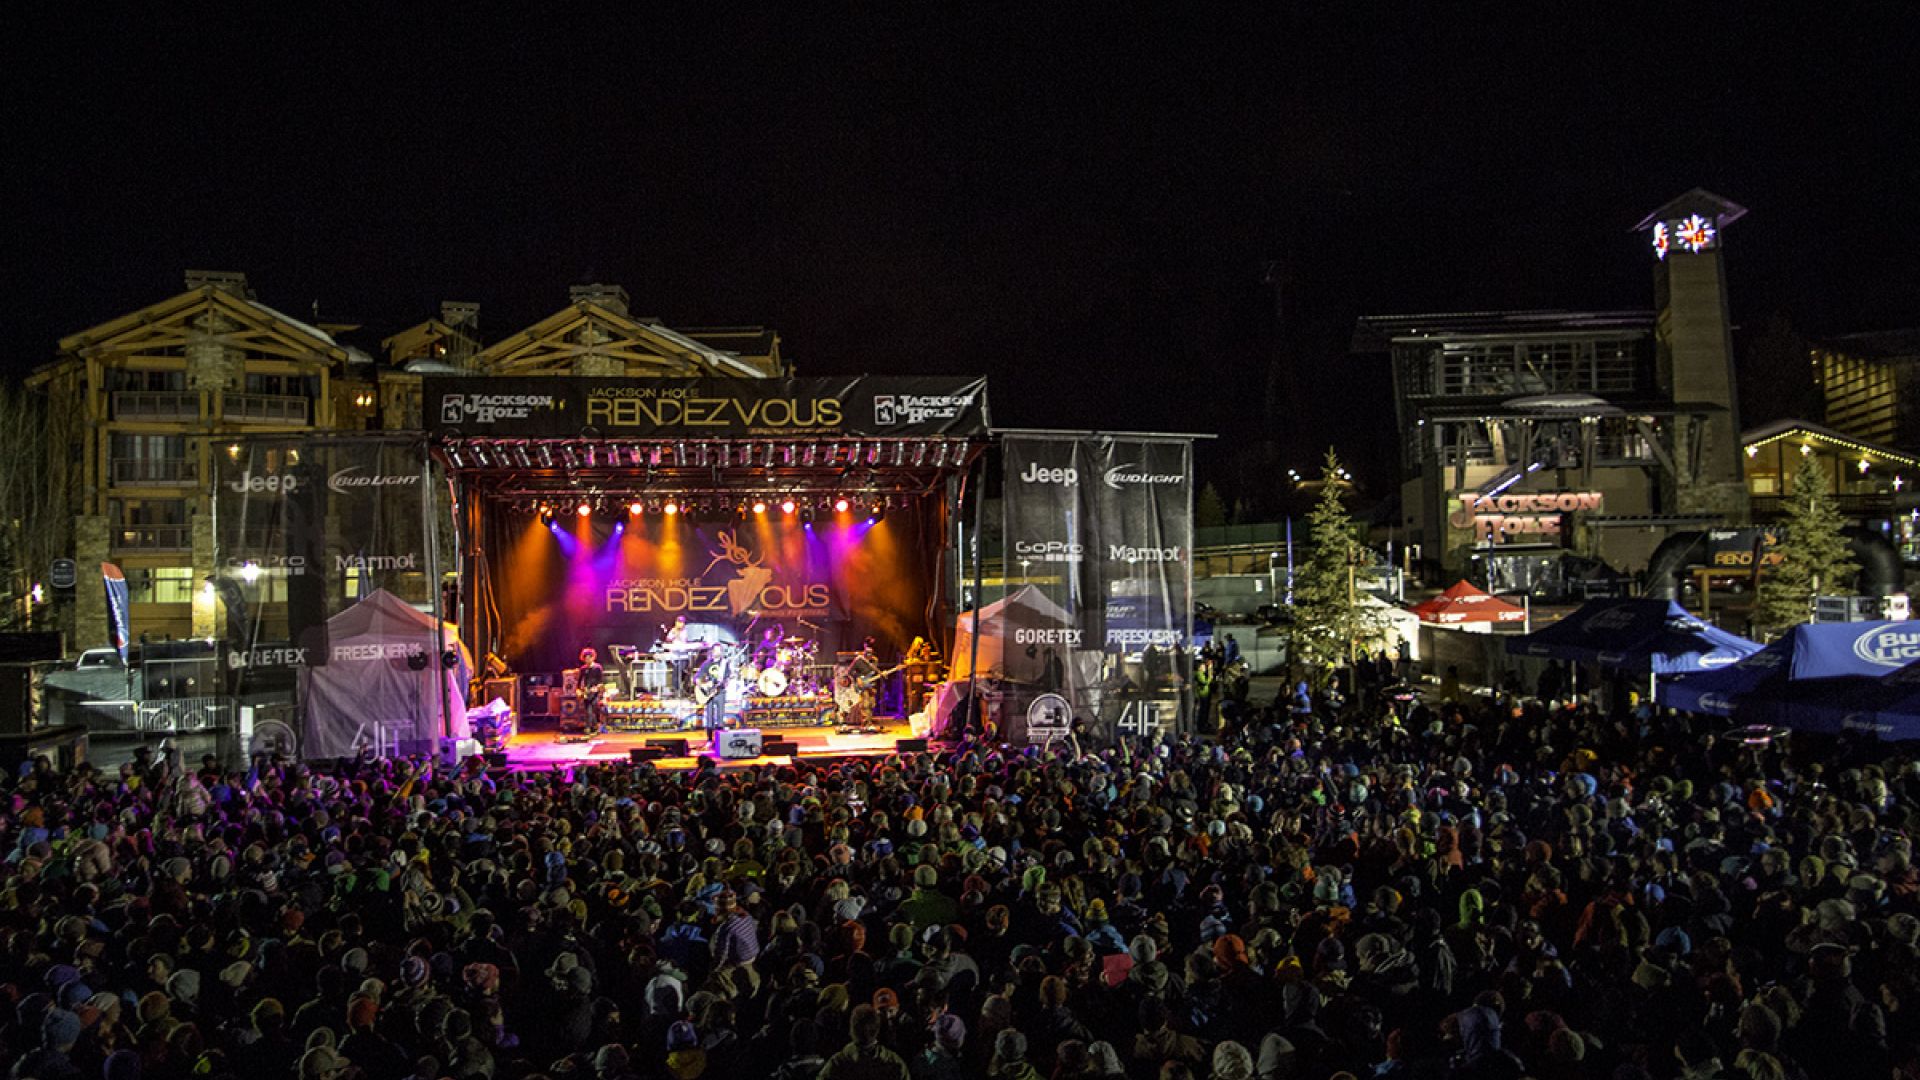 Jackson Hole Rendezvous Festival 2018 nighttime view of band on stage and crowd